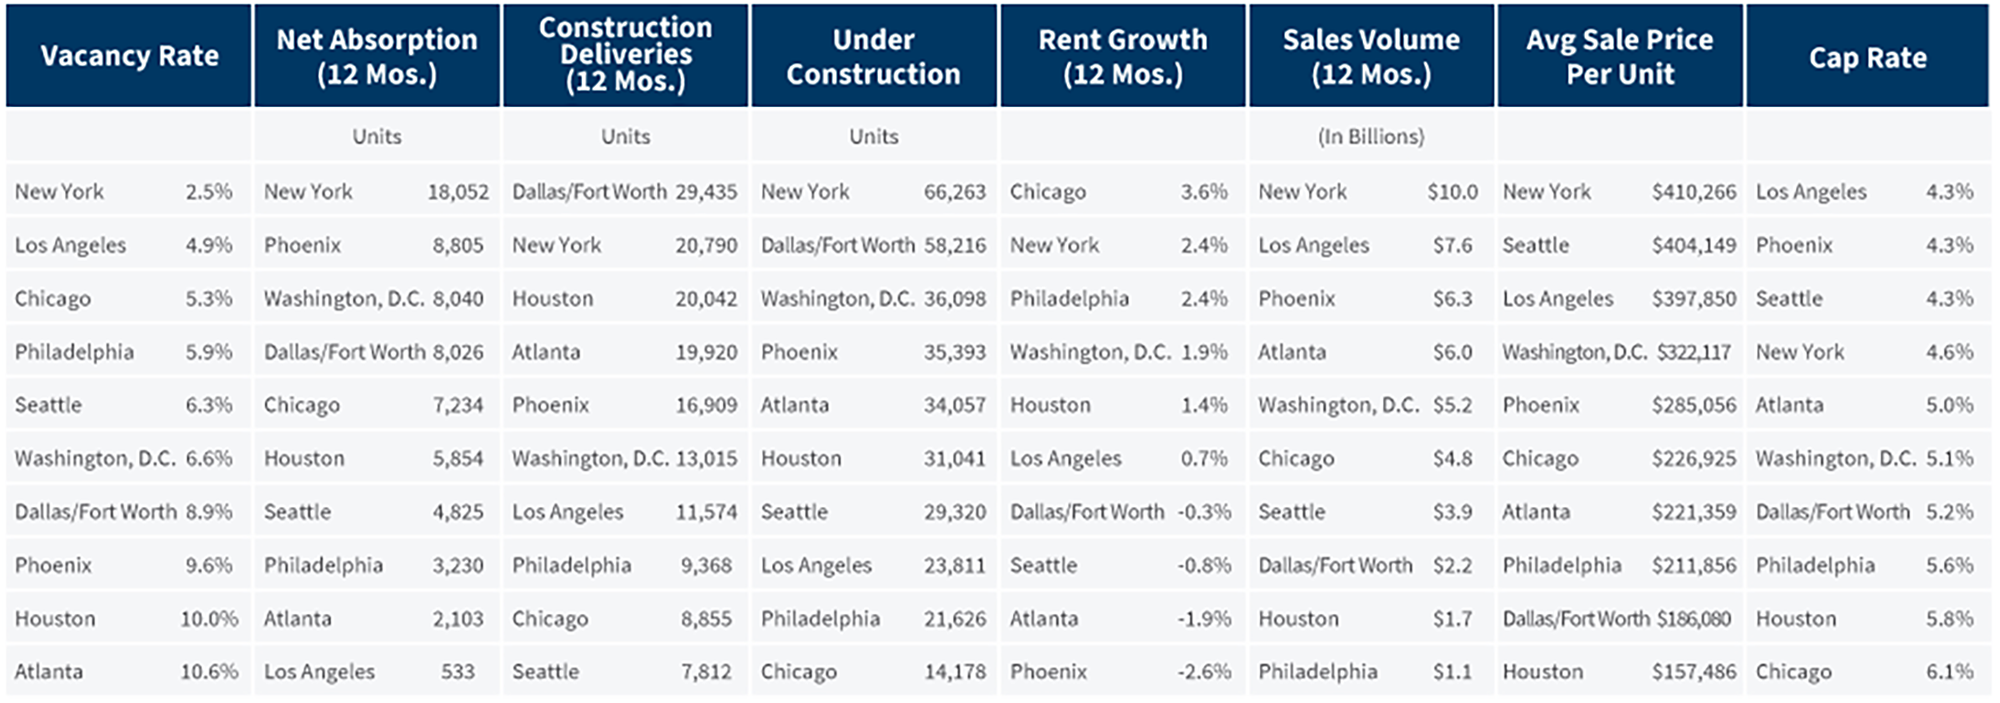 10 Largest Multi-Family Markets (by Inventory) Comparison